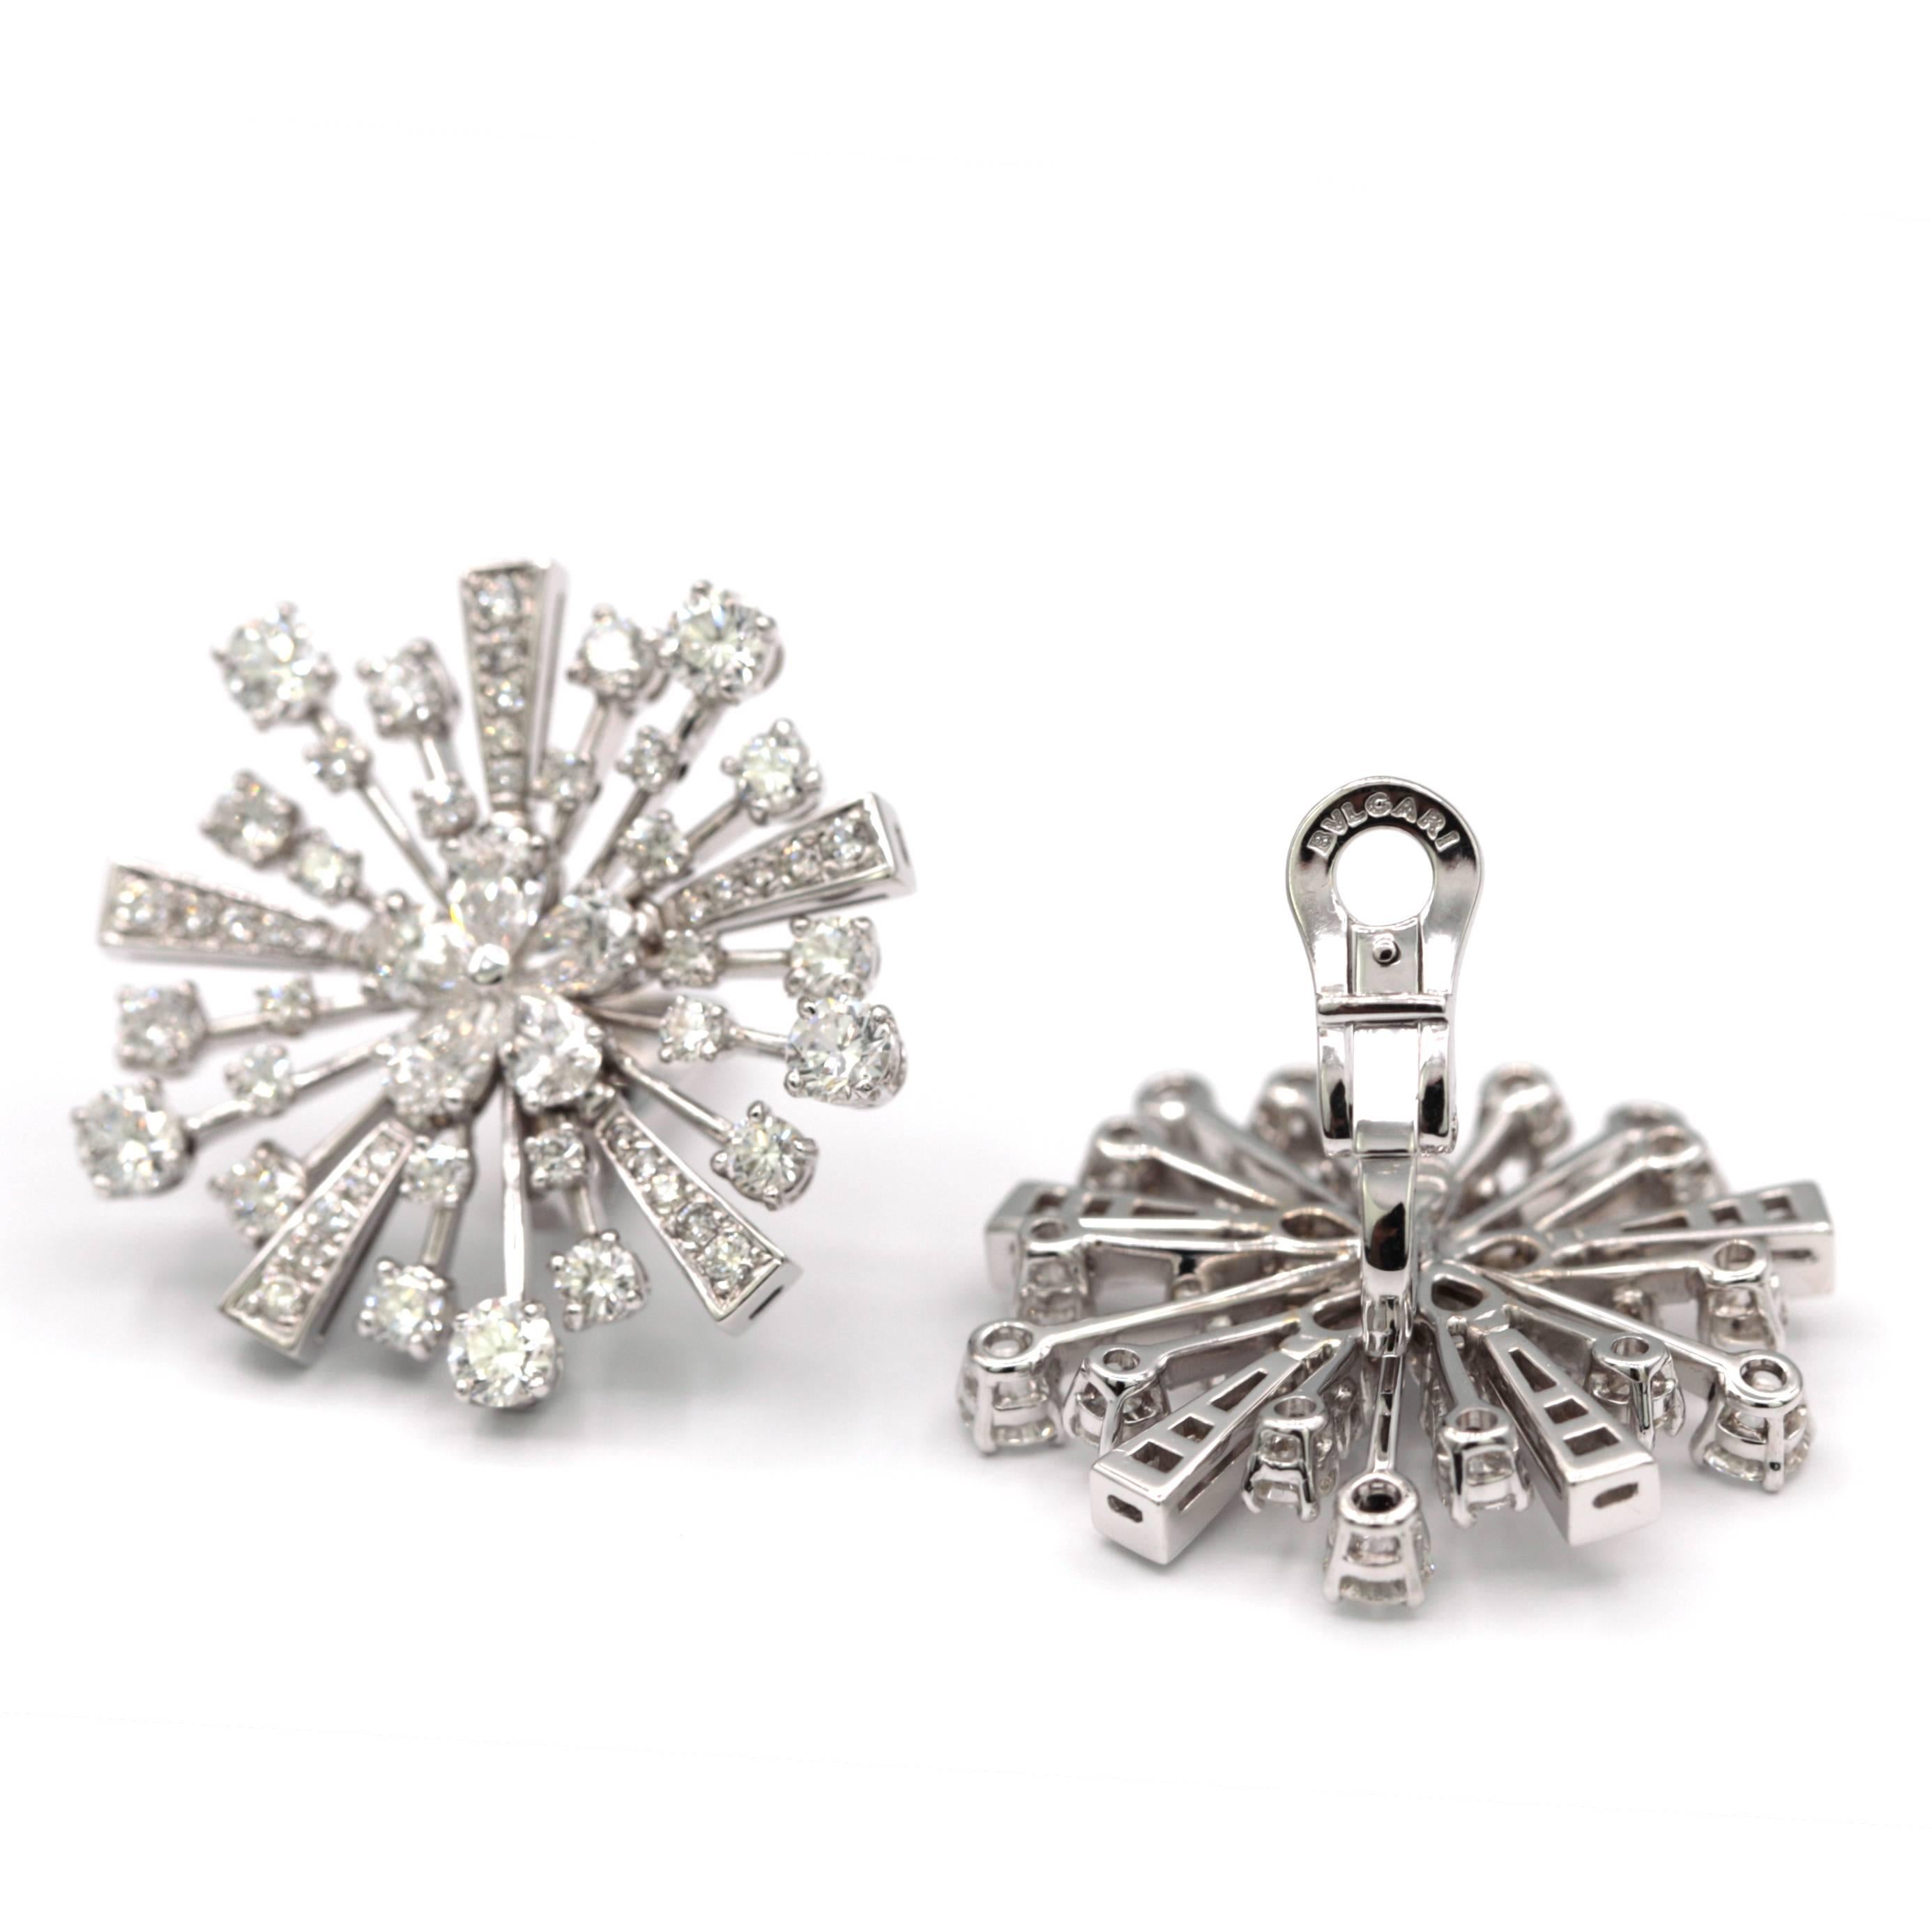 Bvlgari Fireworks Diamond Earrings 18 Karat White Gold In Excellent Condition For Sale In Los Angeles, CA